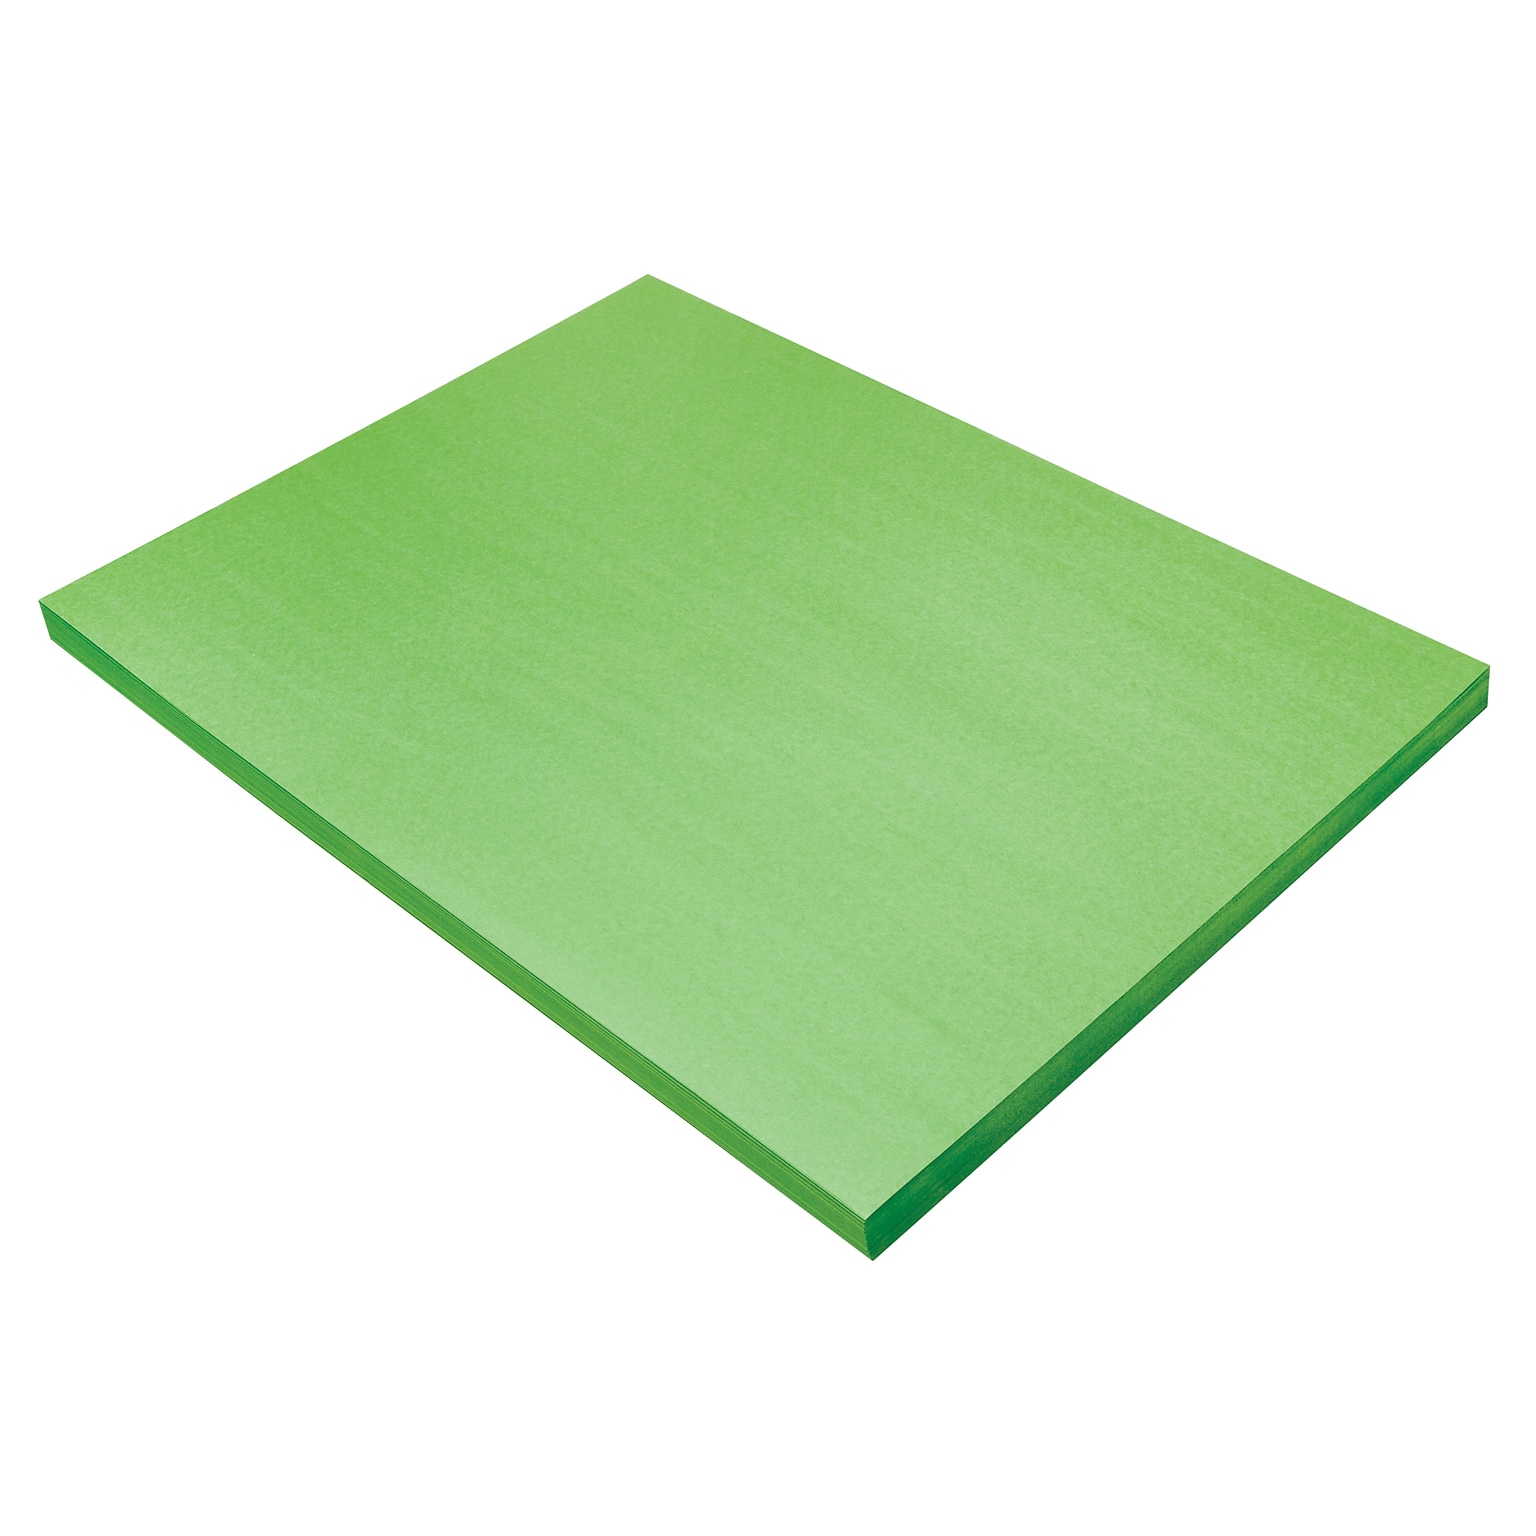 Pacon SunWorks 18 x 24 Construction Paper, Bright Green, 100 Sheets (PAC9618)